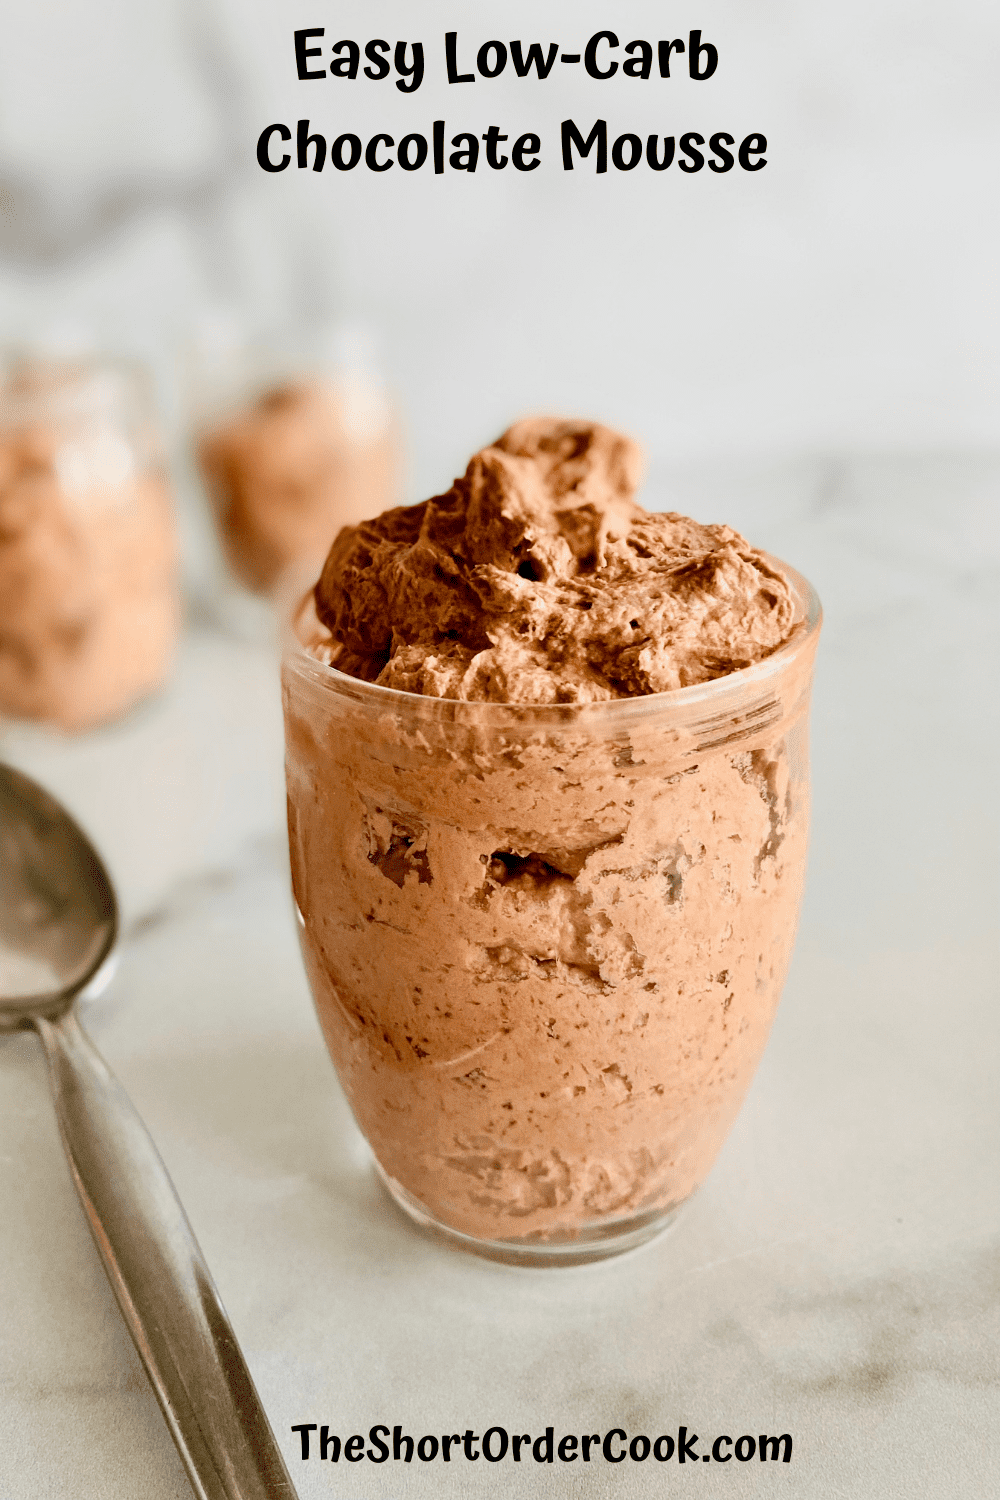 Easy Low-Carb Chocolate Mousse in a serving glass ready to eat